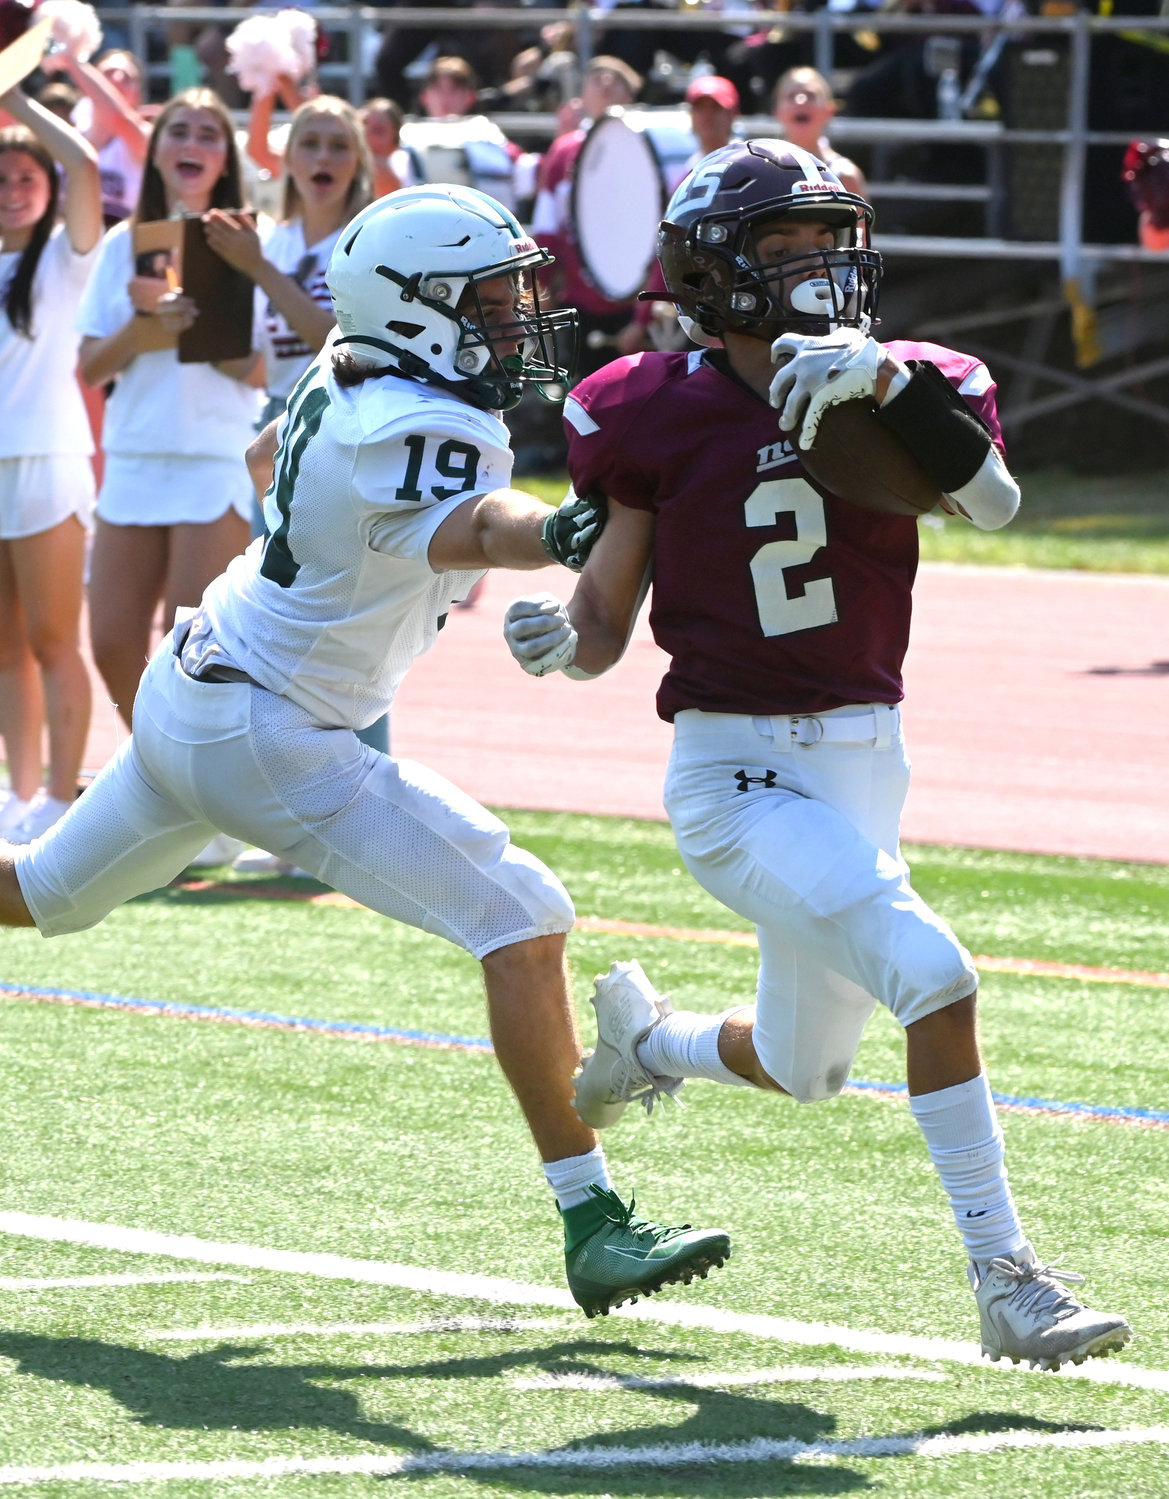 Photos by Donovan Berthoud/Herald
Nick Livoti’s 23-yard touchdown run helped North Shore roll to a 41-6 win over Locust Valley as the Vikings began their title defense.